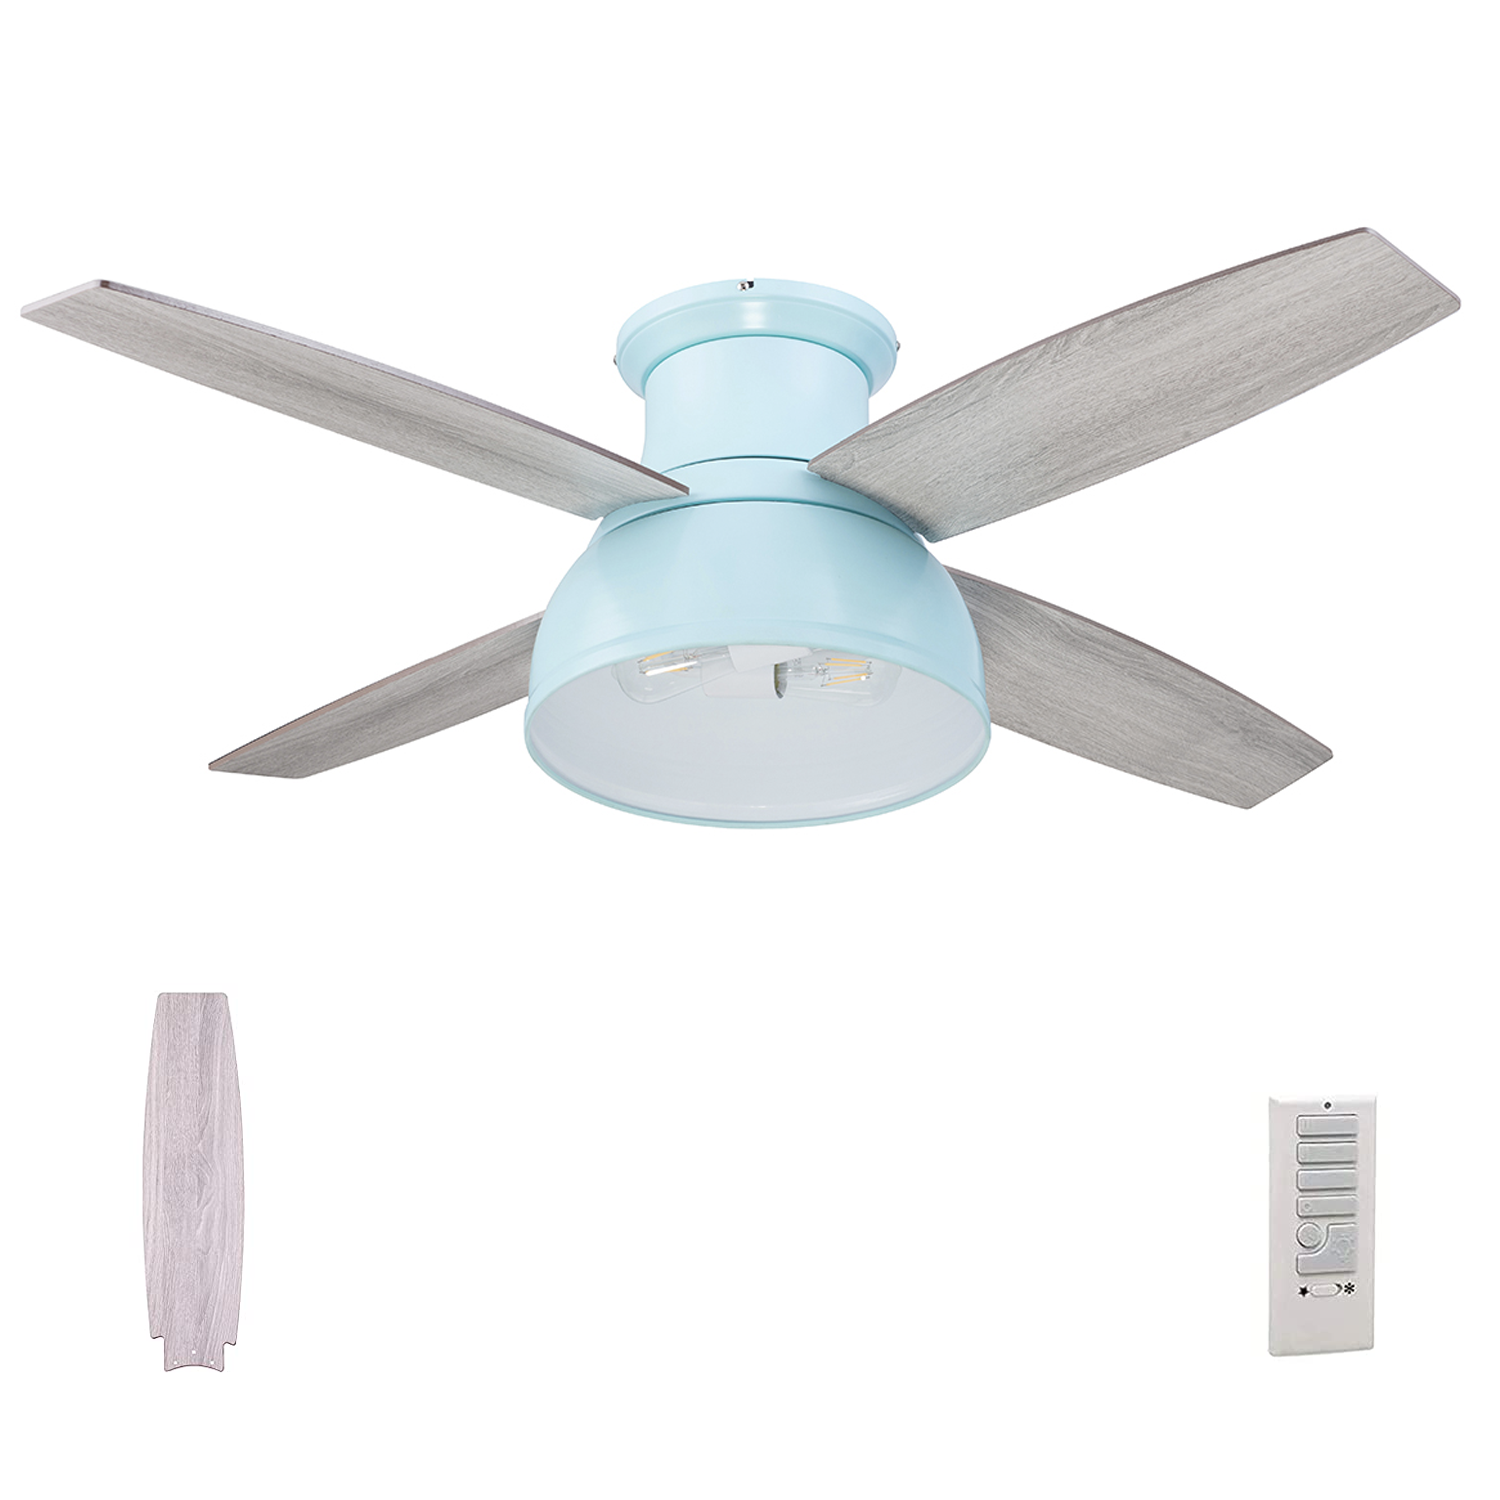 52 Inch Edora, Seafoam, Remote Control, Ceiling Fan by Prominence Home